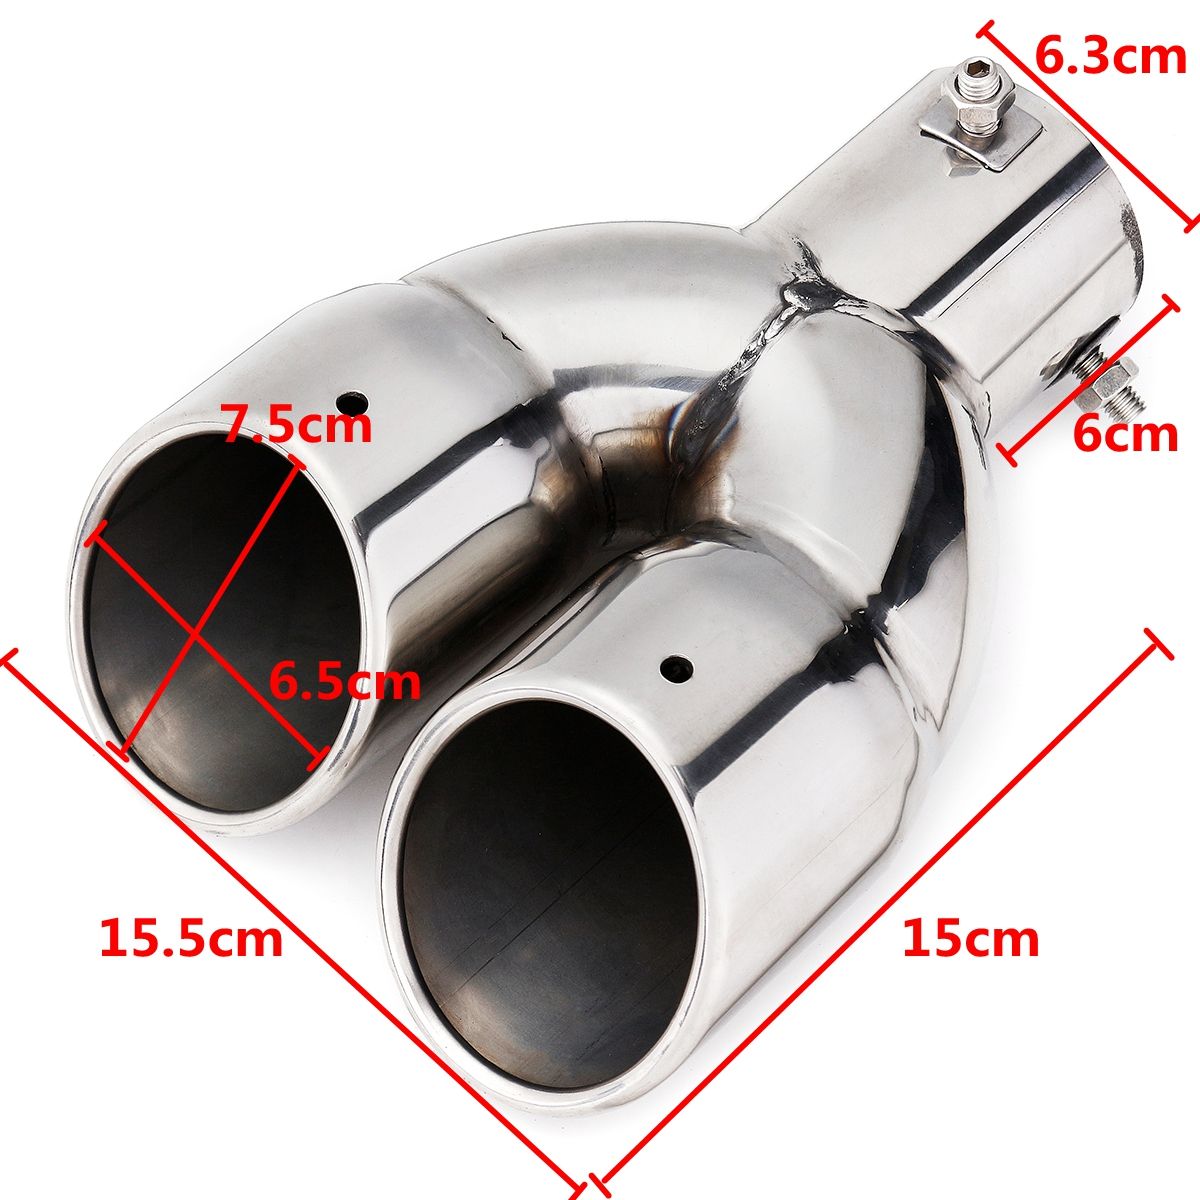 Universal-Silver-Double-Outlet-Exhaust-Muffler-Tip-End-Tail-Pipe-1328135